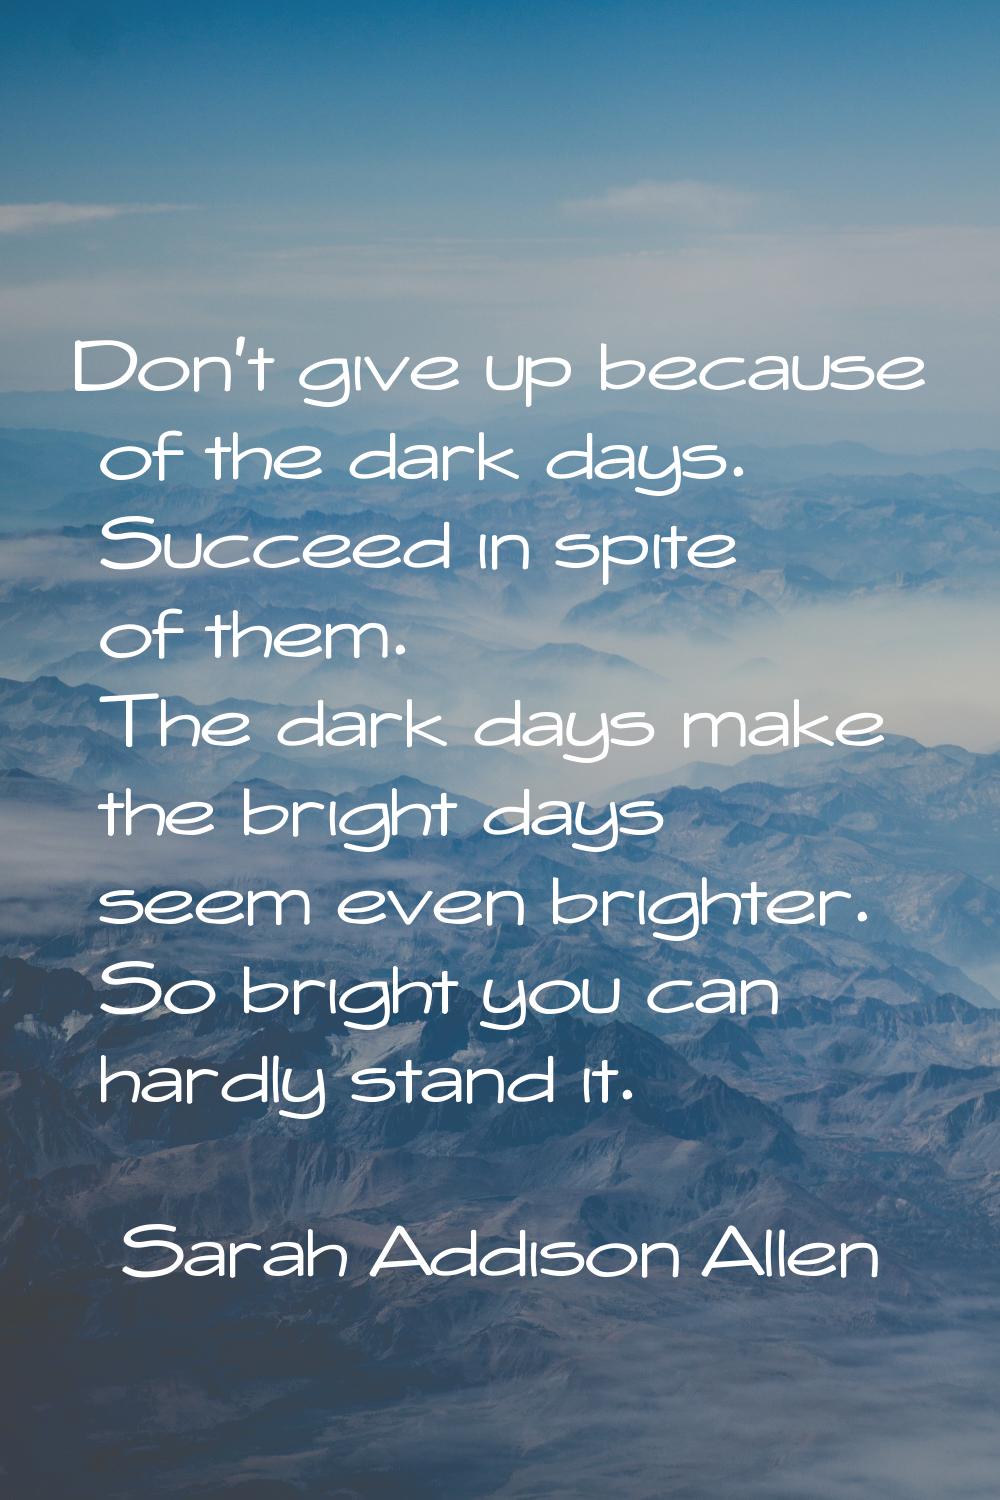 Don't give up because of the dark days. Succeed in spite of them. The dark days make the bright day